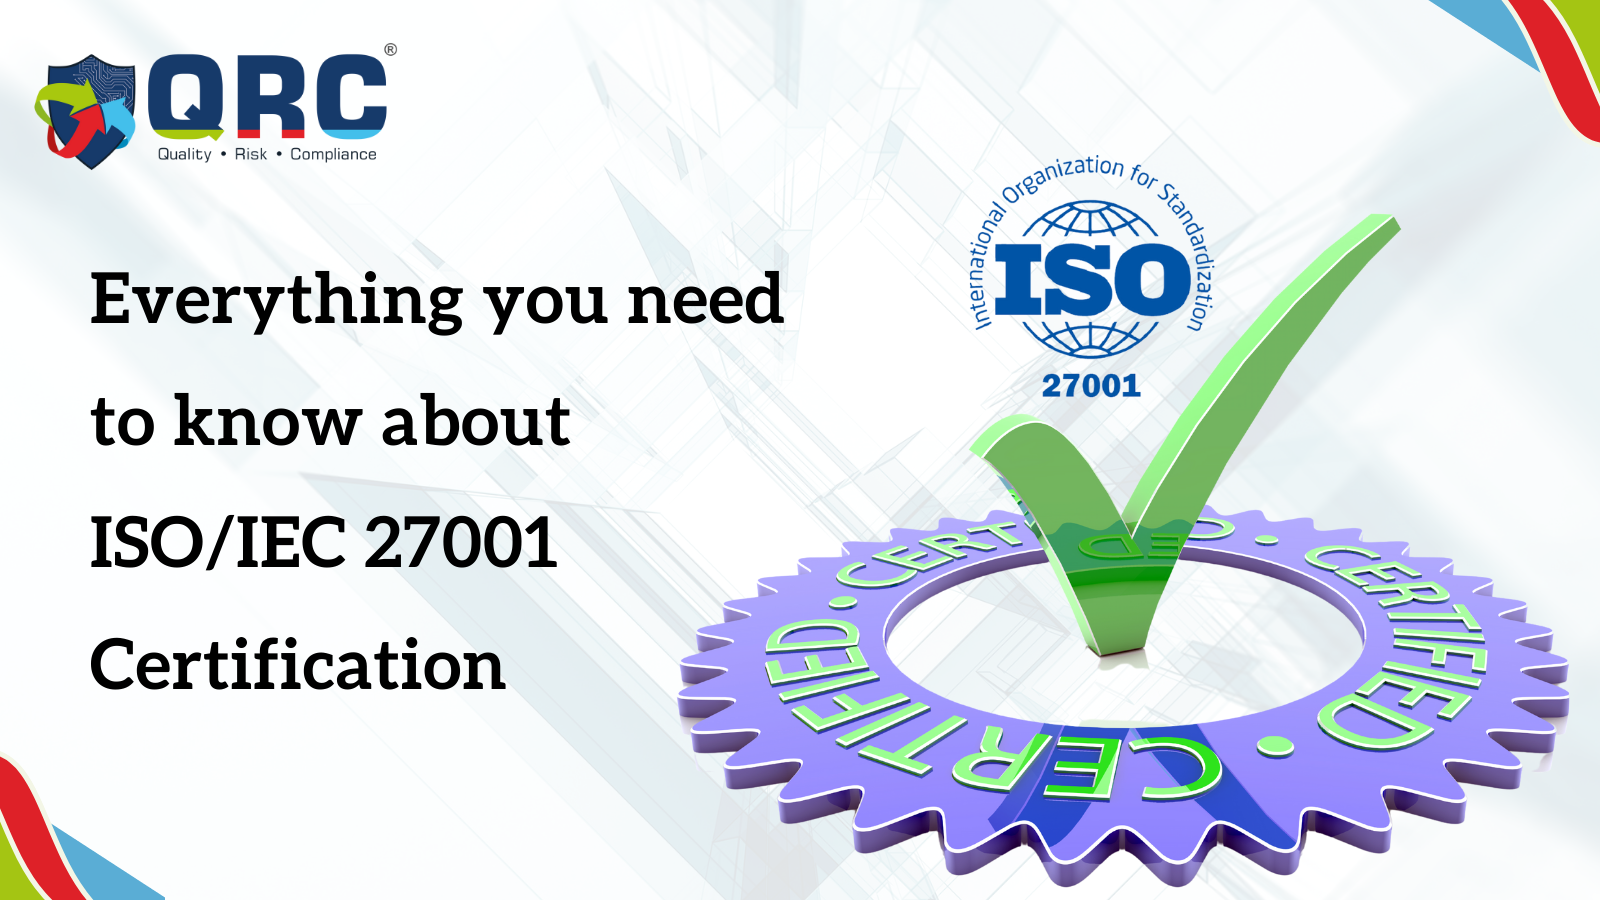 Everything you need to know about ISO/IEC 27001